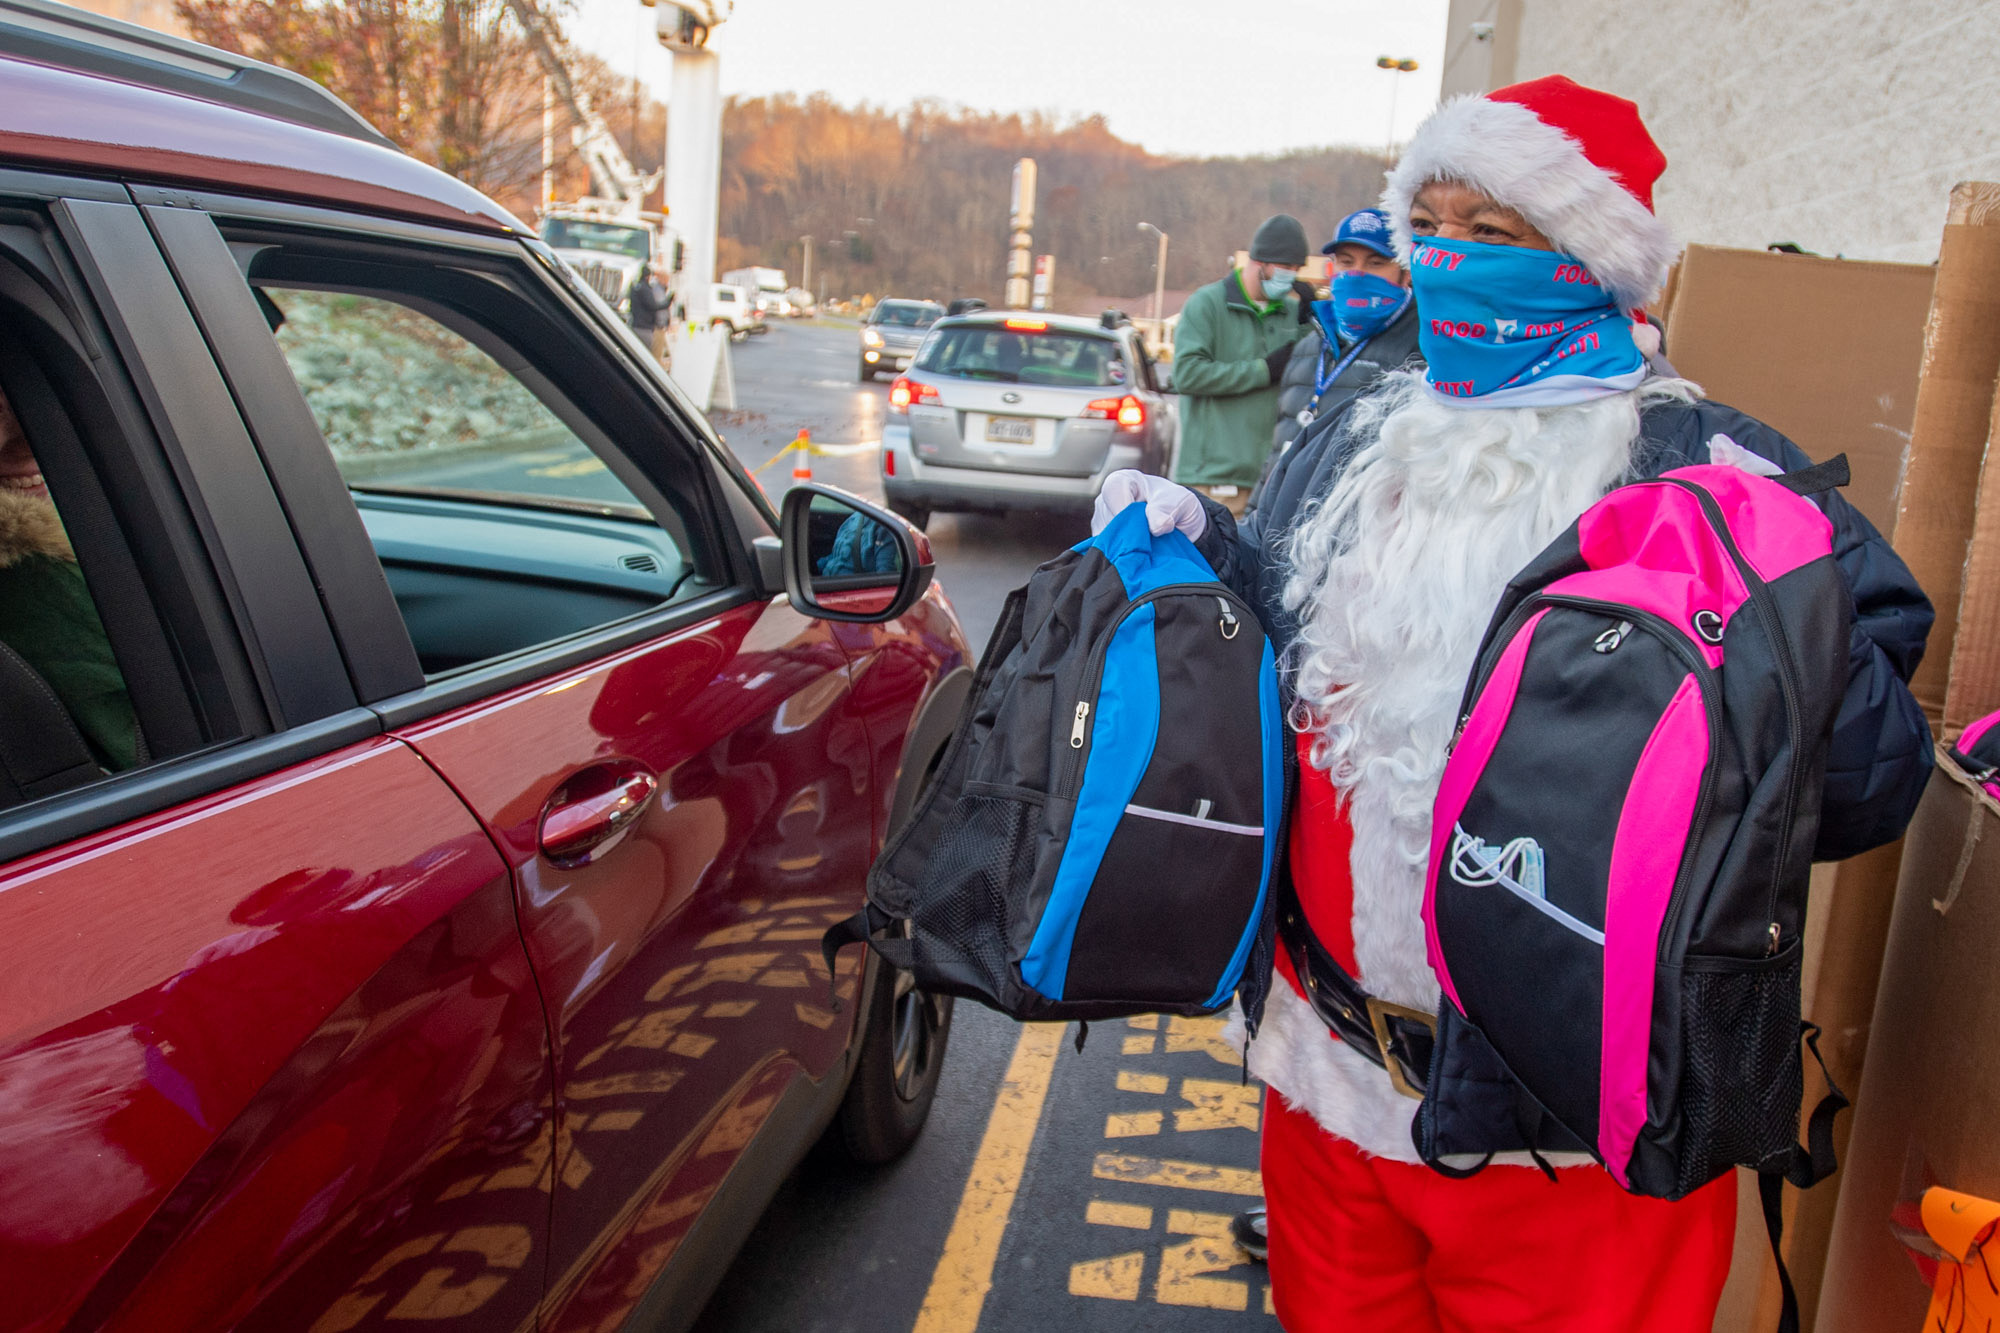 Santa handing gifts to people in cars